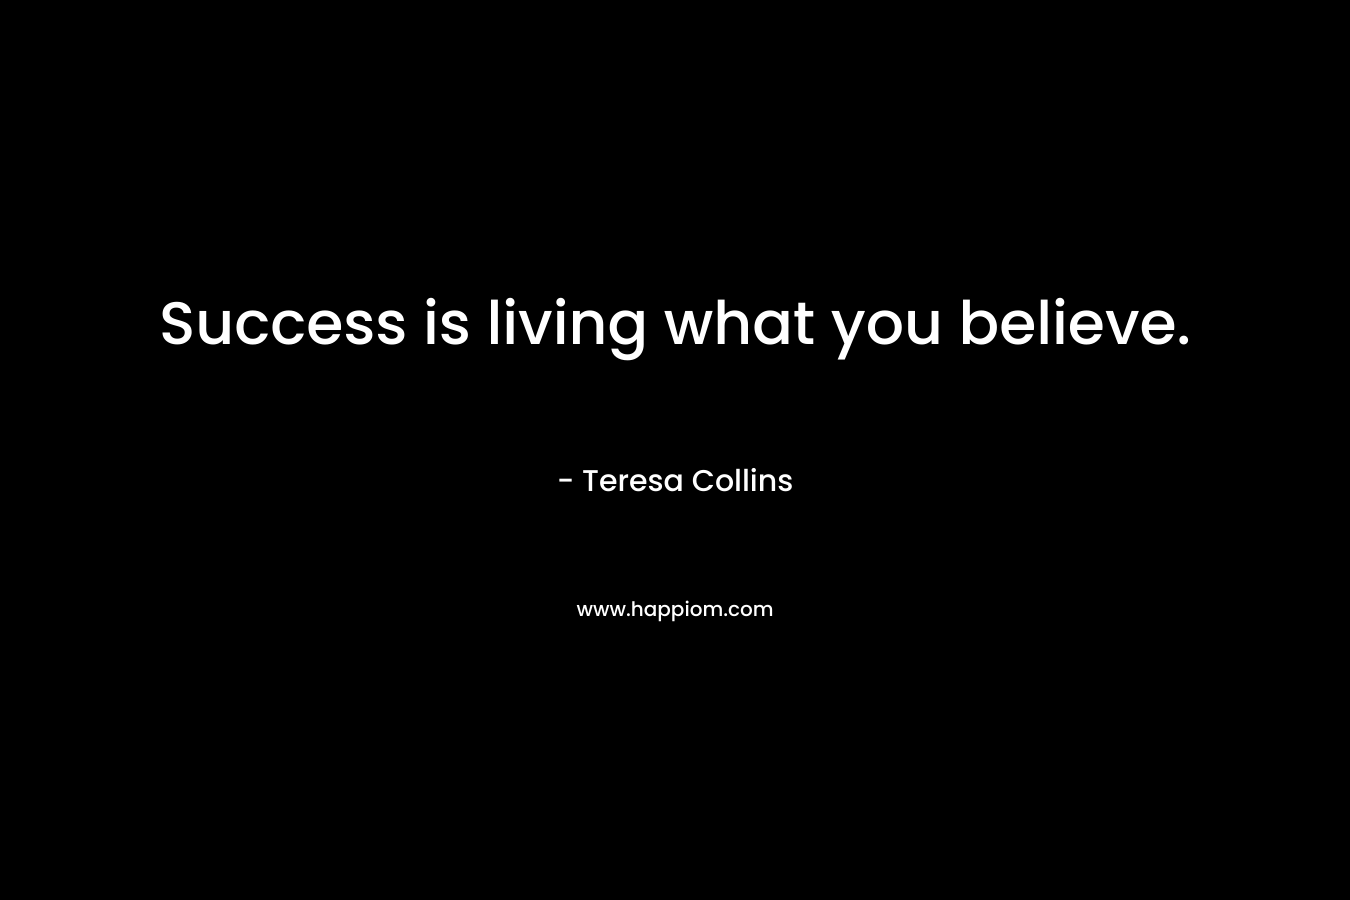 Success is living what you believe.